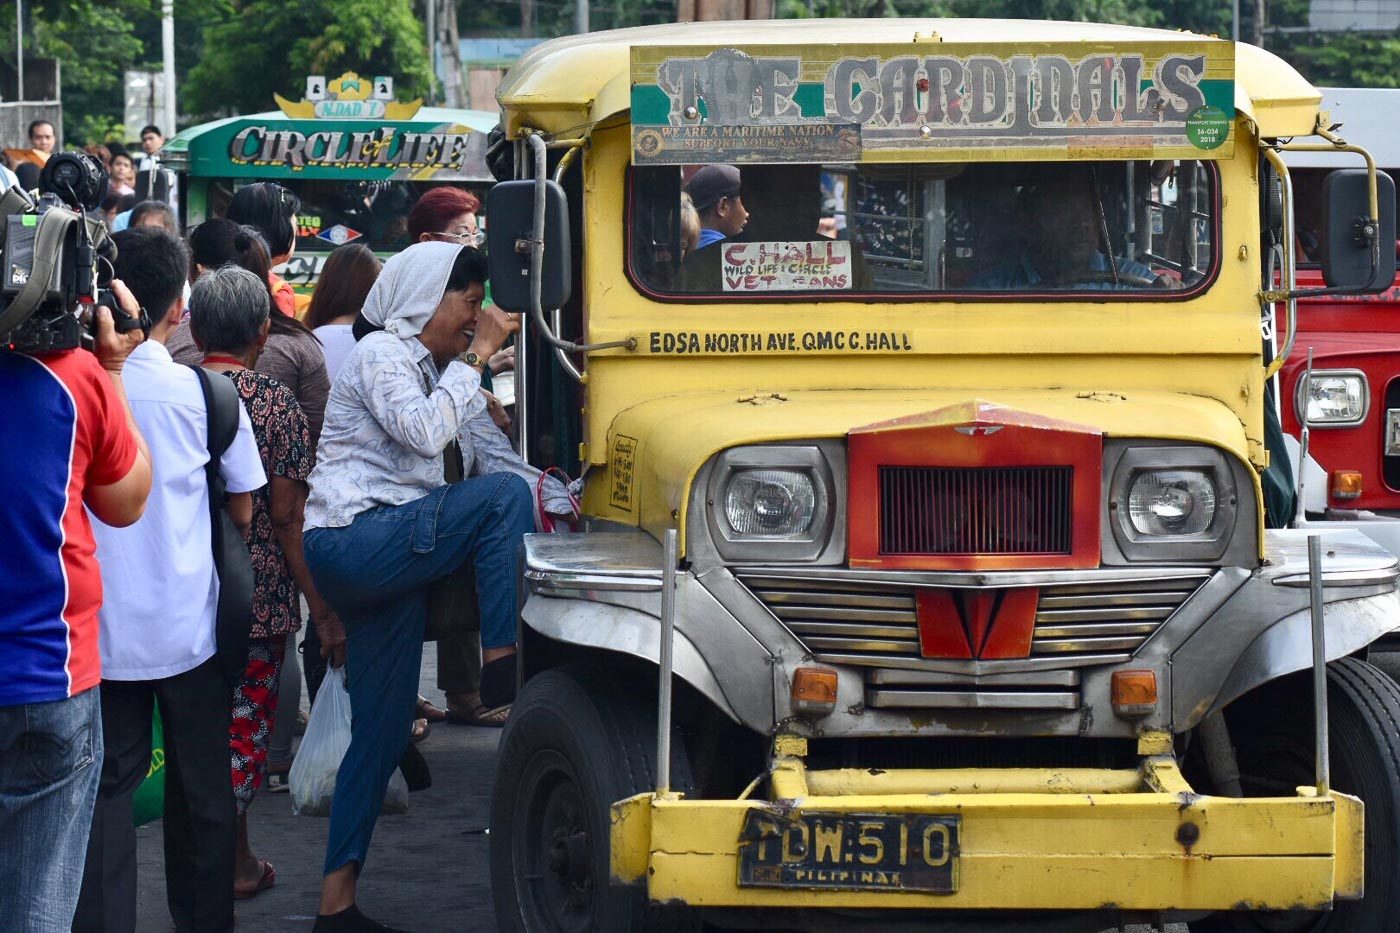 Jeepney drivers in more parts of PH seeking fare hike